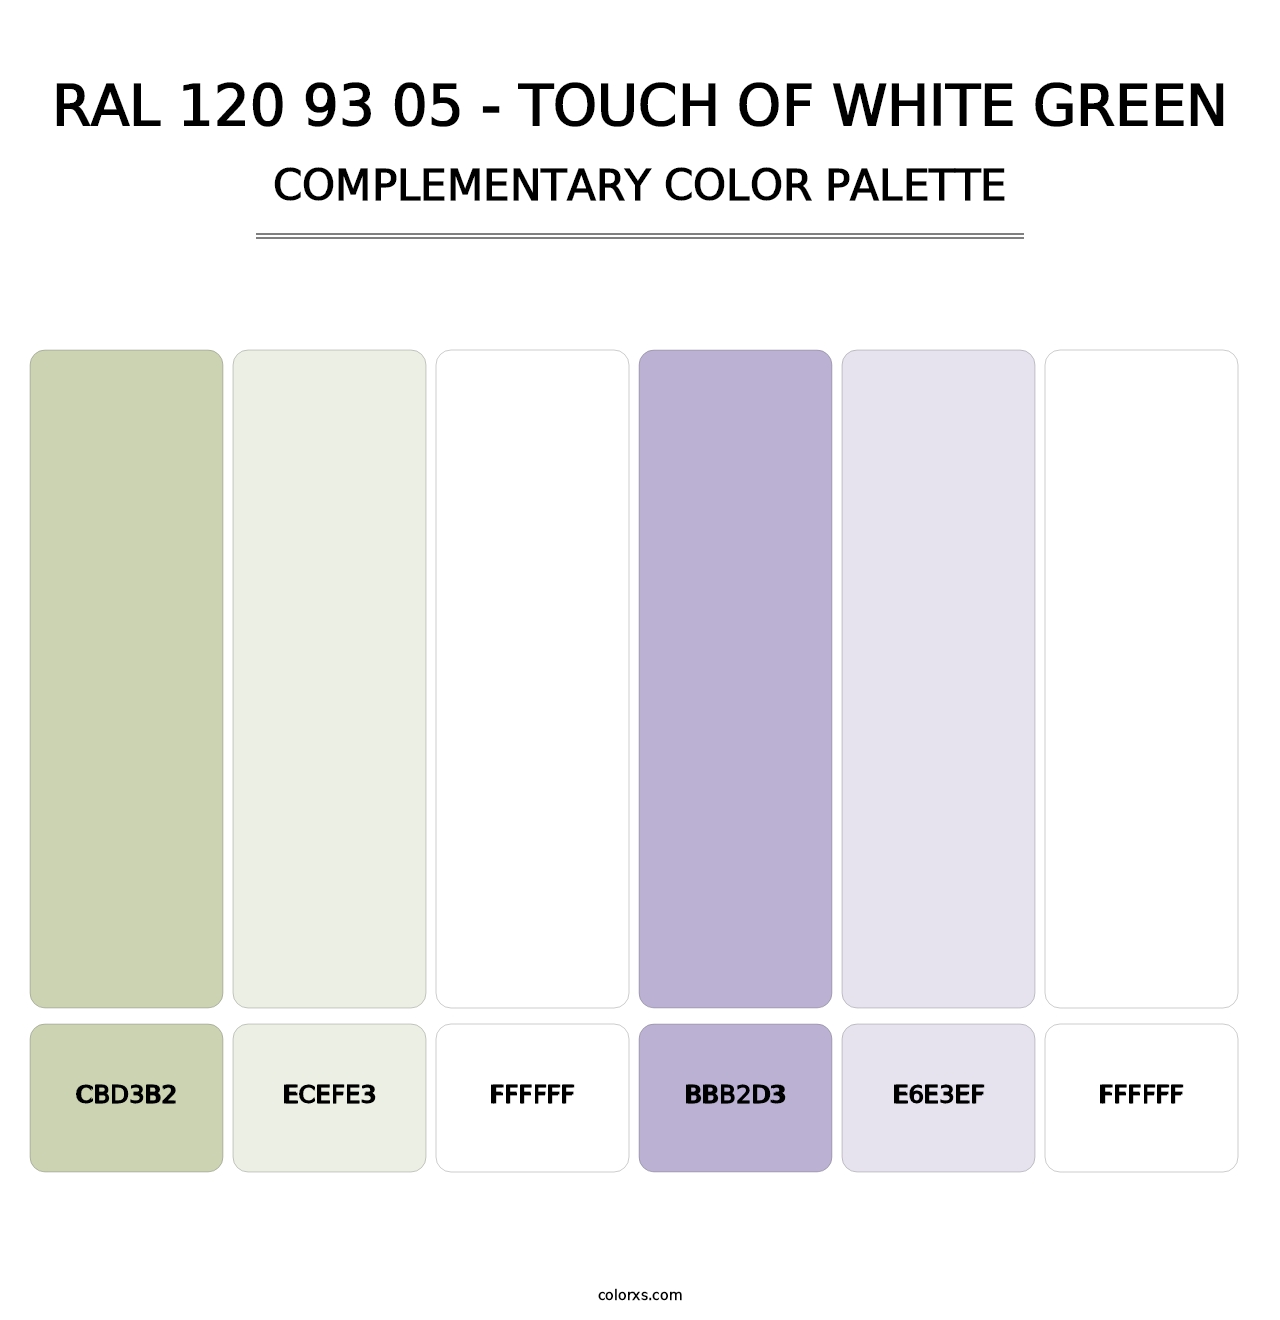 RAL 120 93 05 - Touch Of White Green - Complementary Color Palette